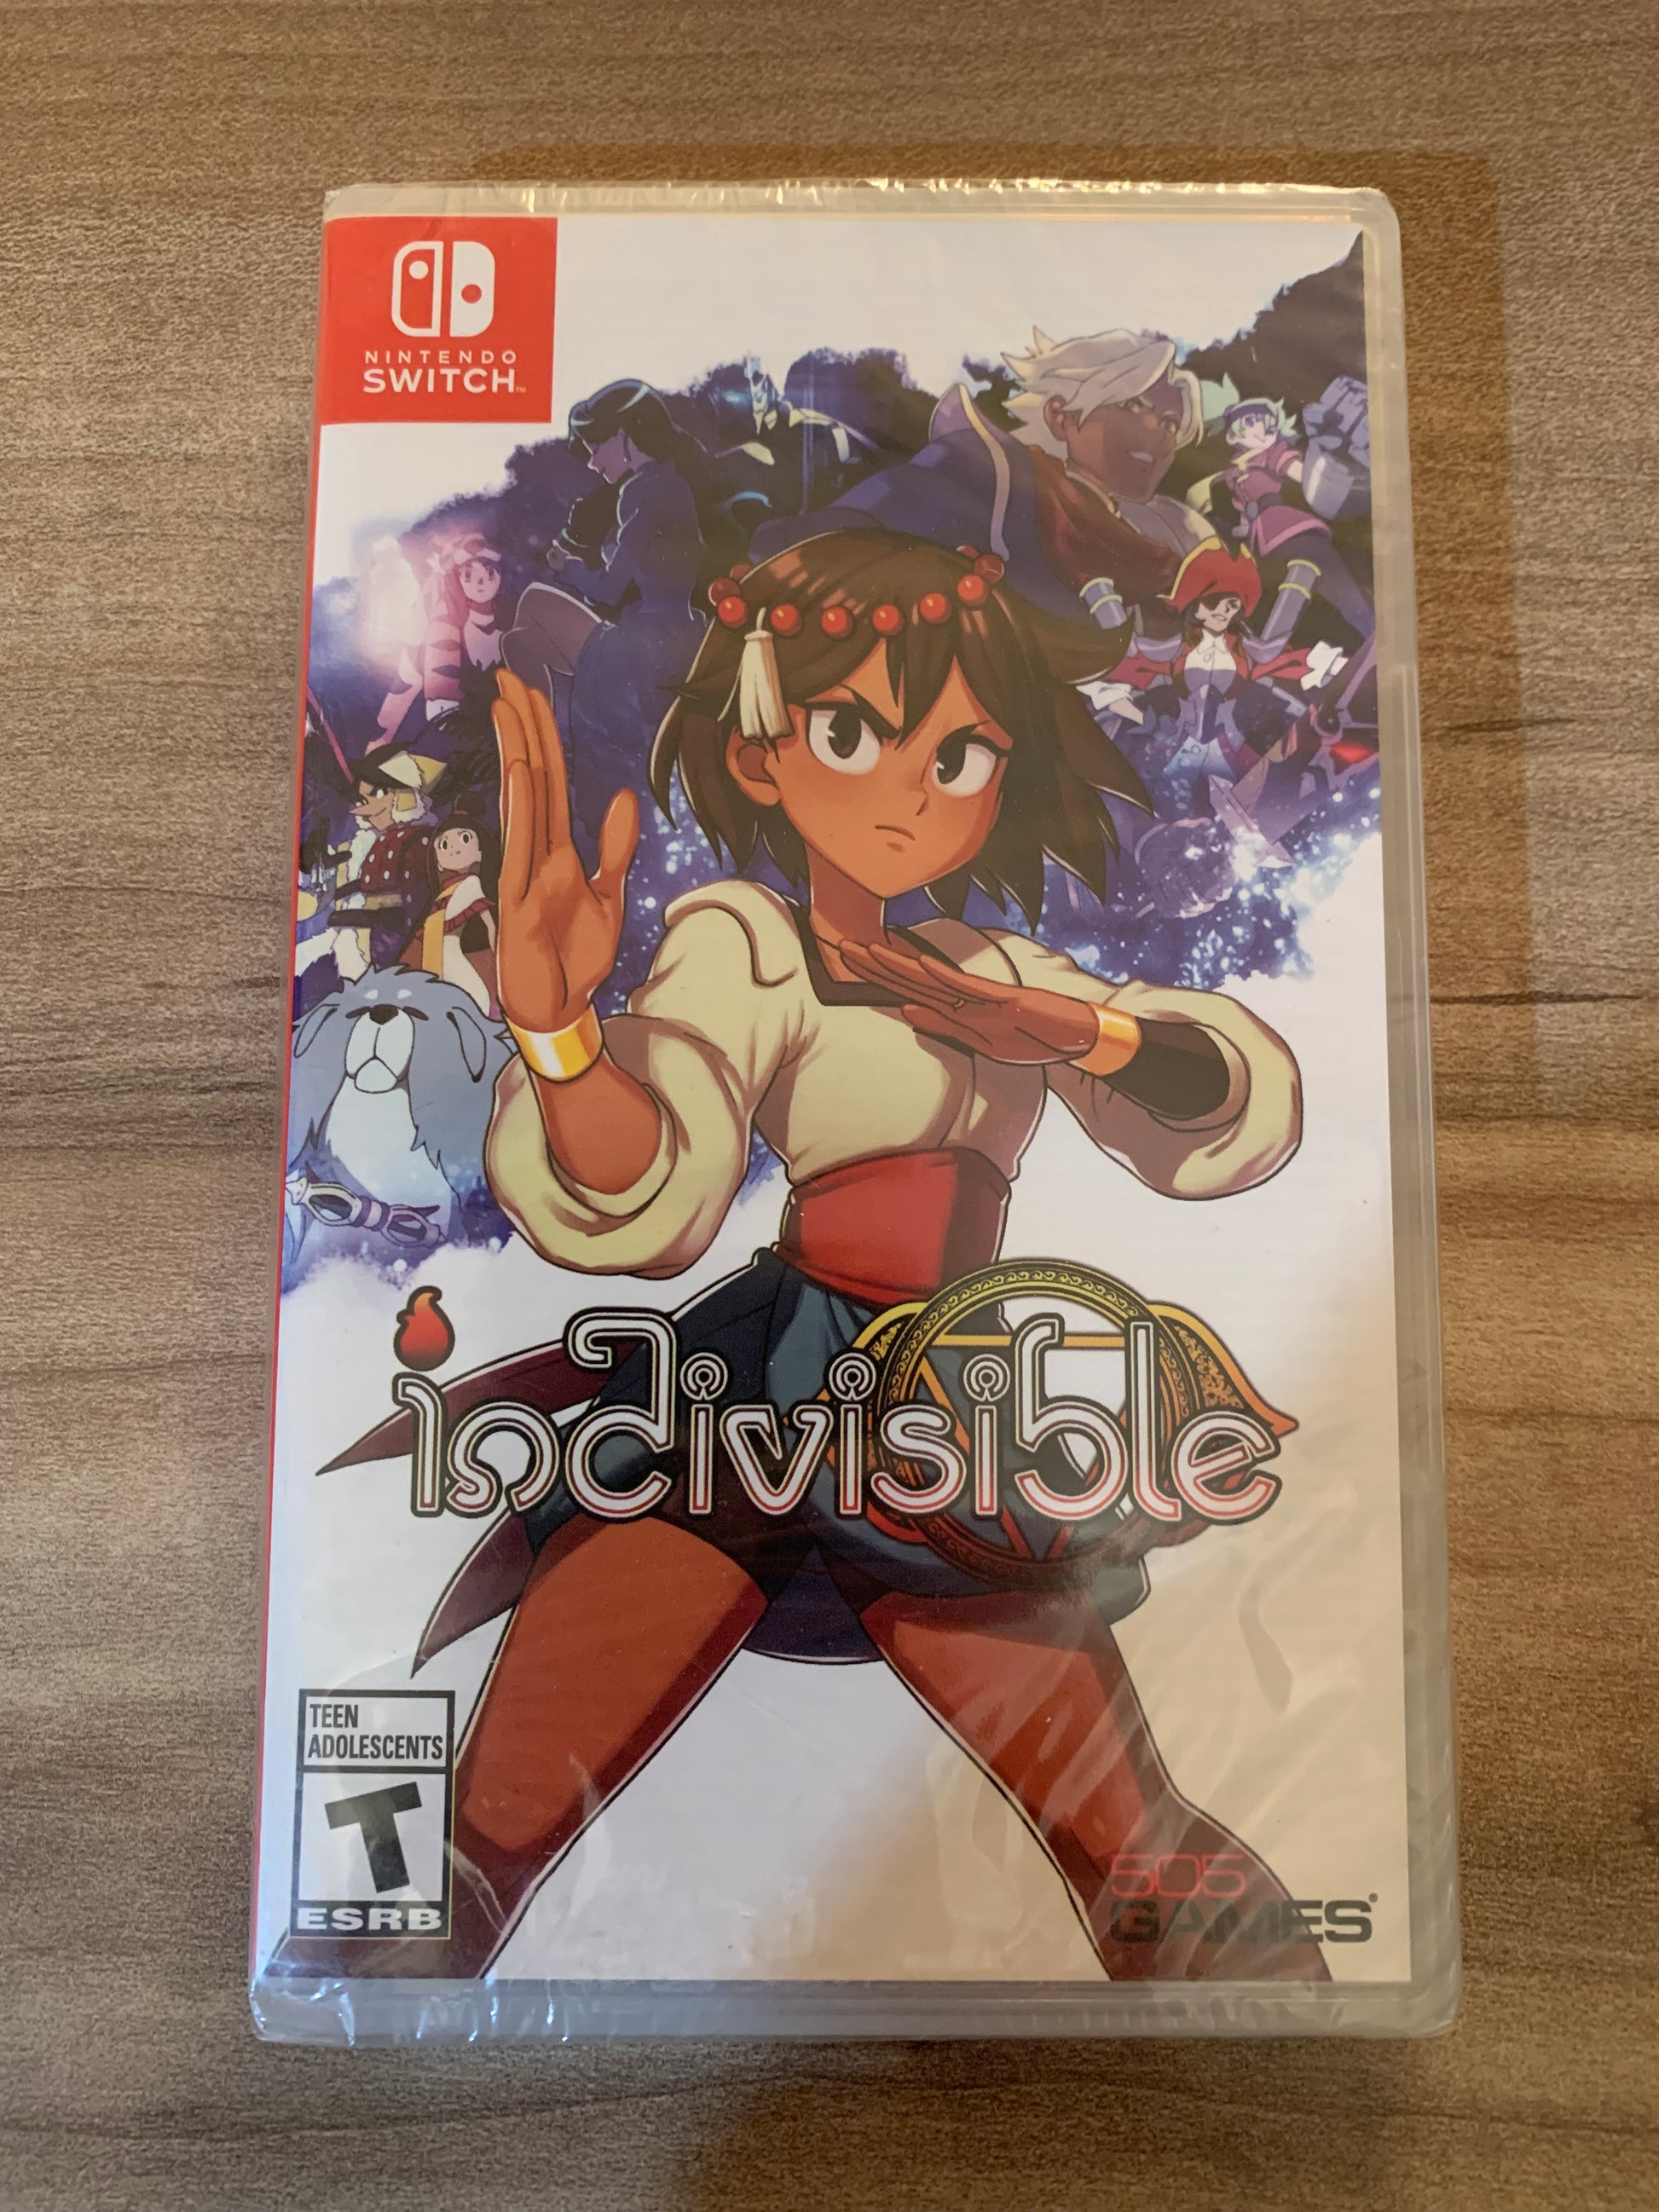 PiXEL-RETRO.COM : NINTENDO SWITCH NEW SEALED IN BOX COMPLETE MANUAL GAME NTSC INVIVISIBLE